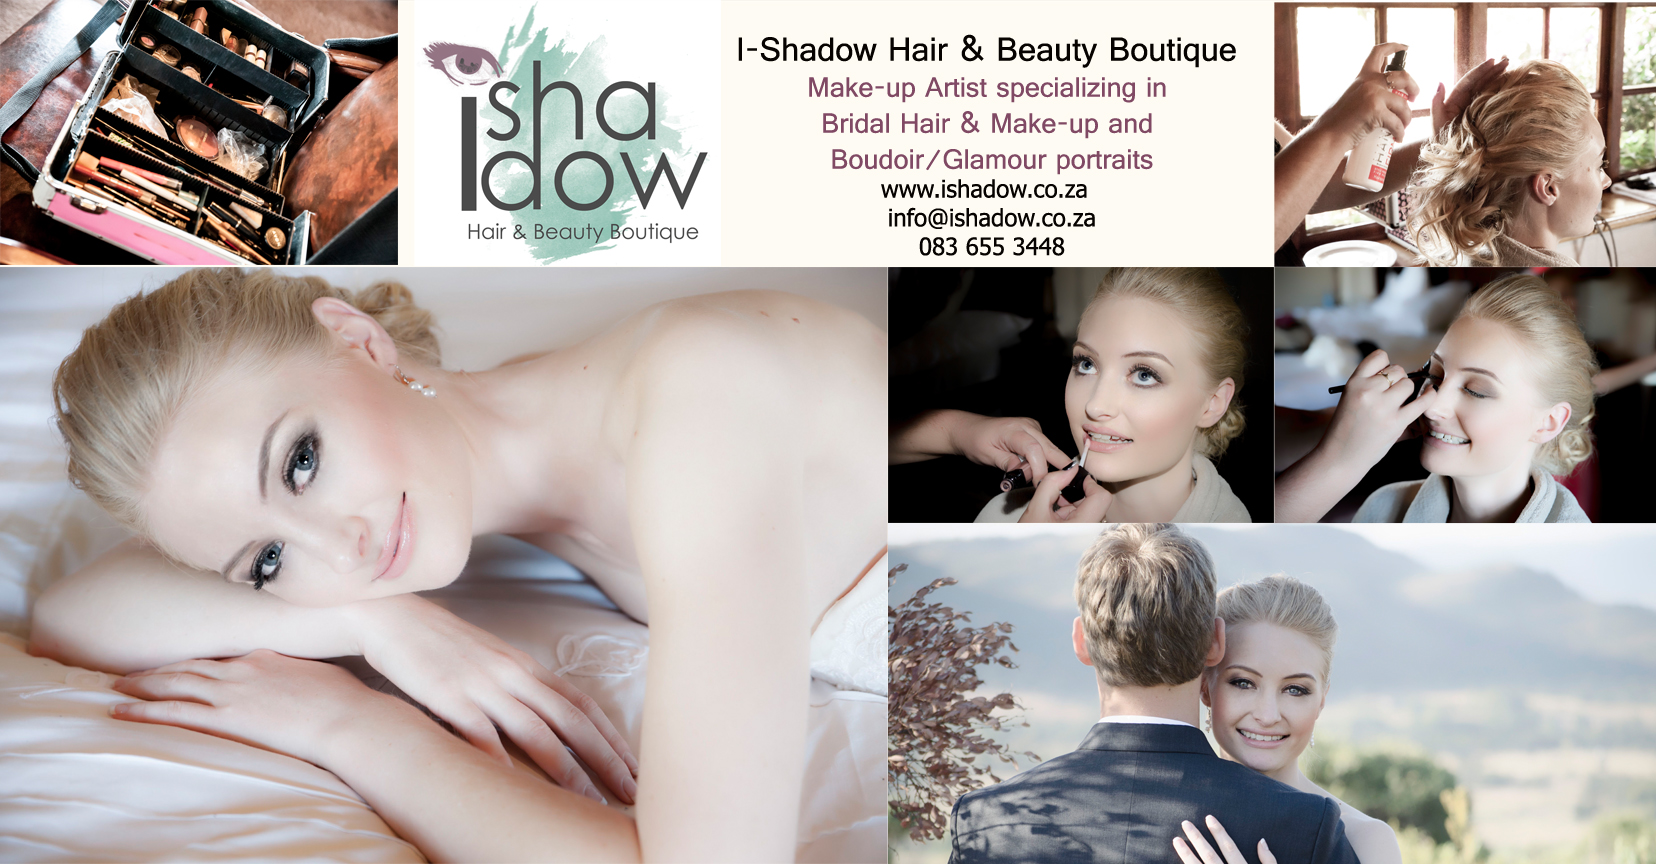 IShadow Hair & Beauty Boutique Add